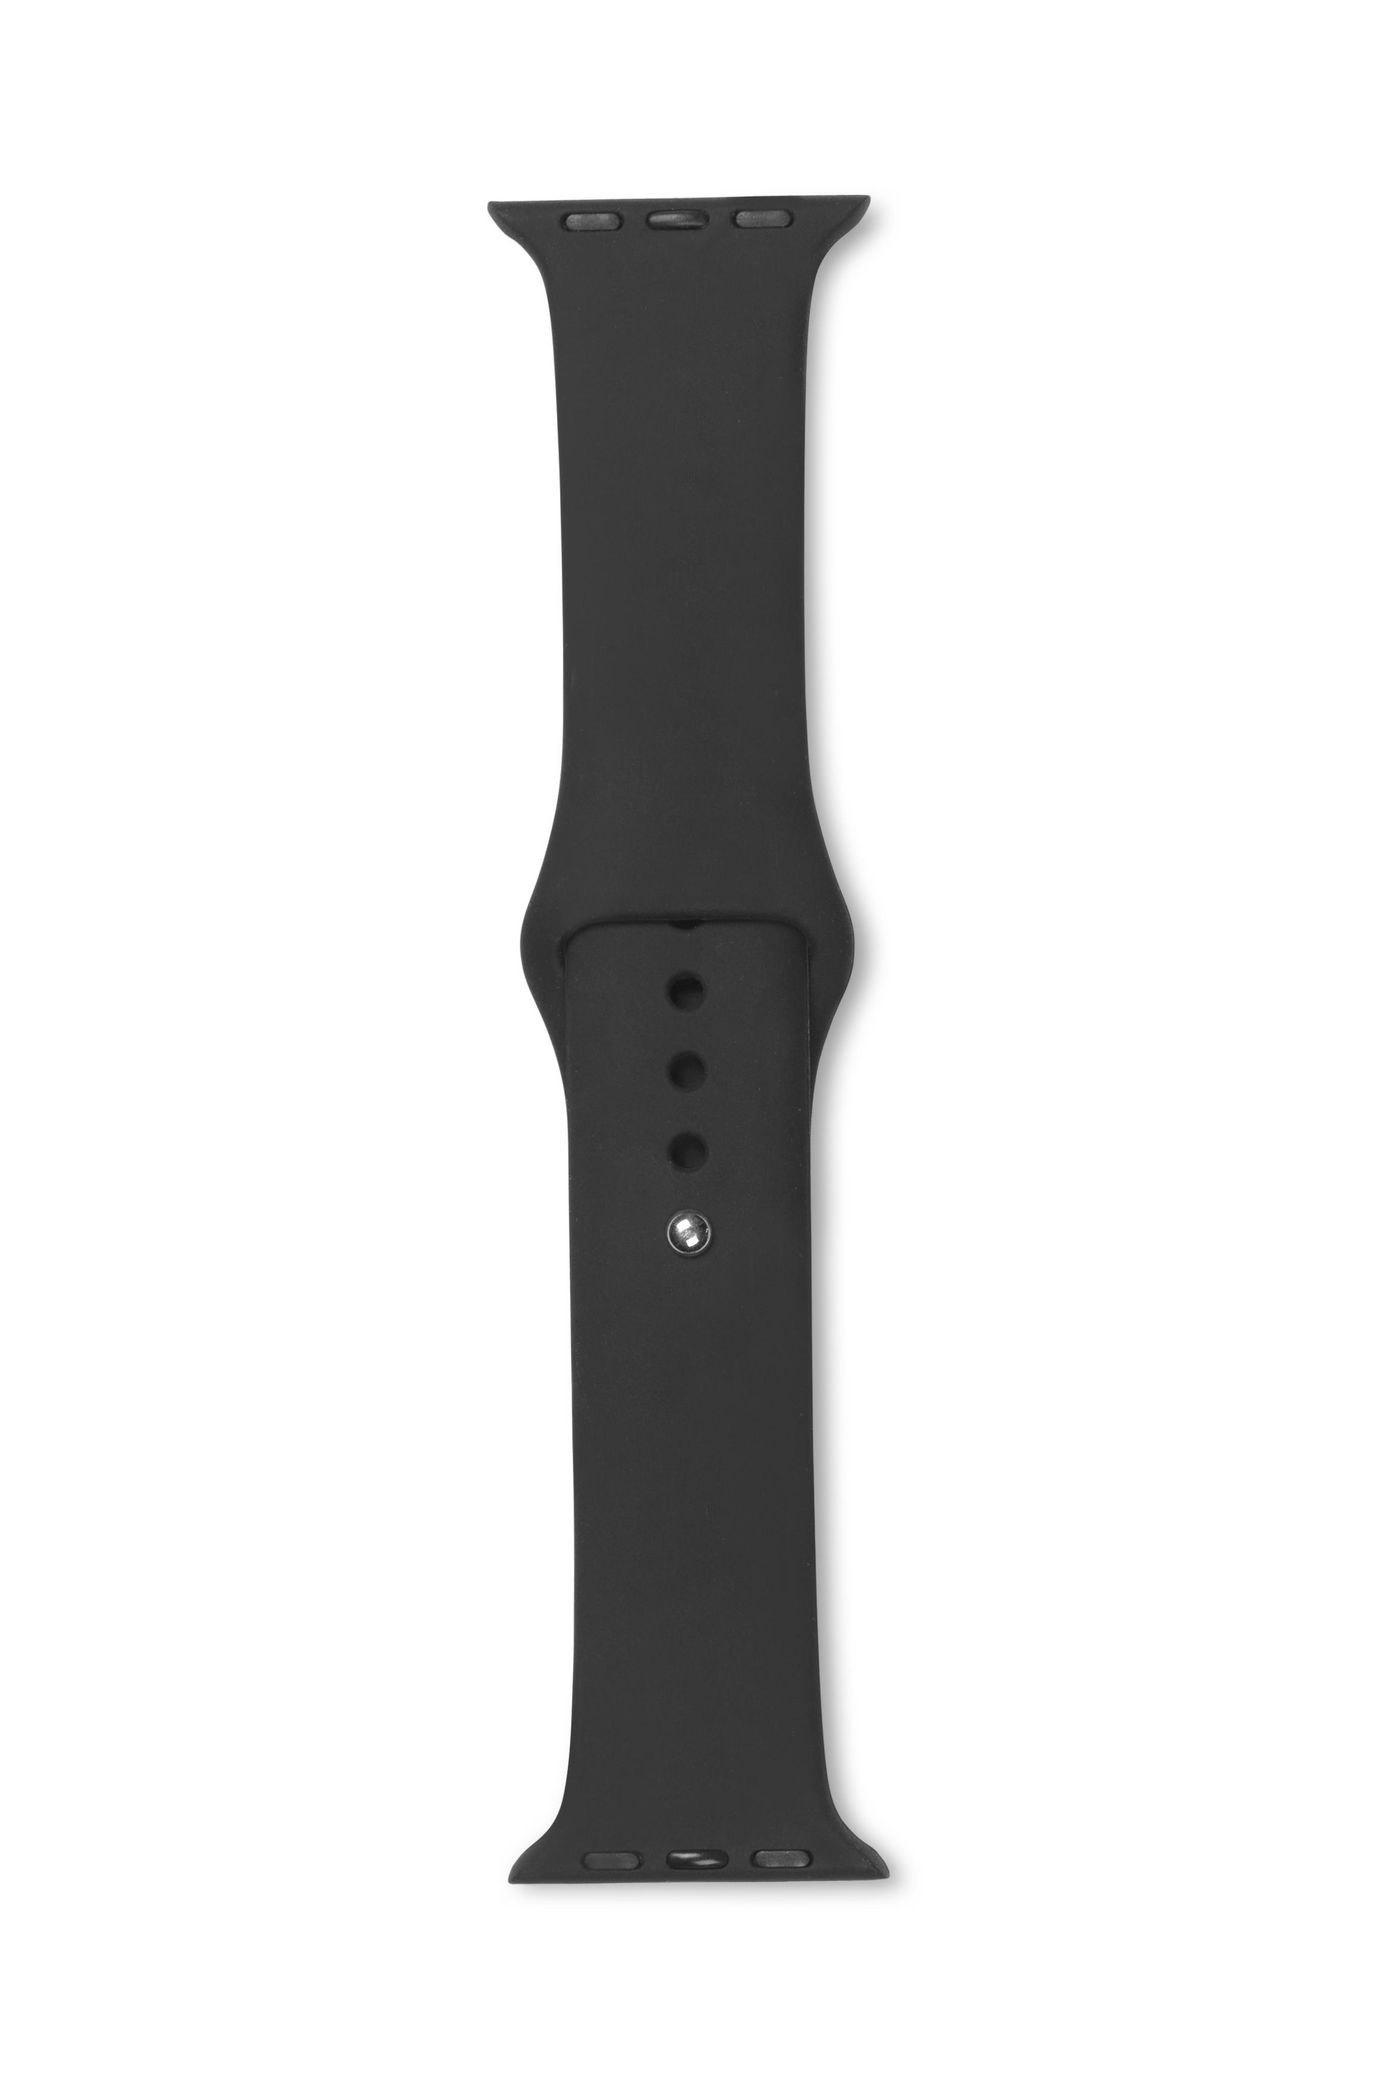 Apple Watch Silicone Strap Color: Black. Width 40mm